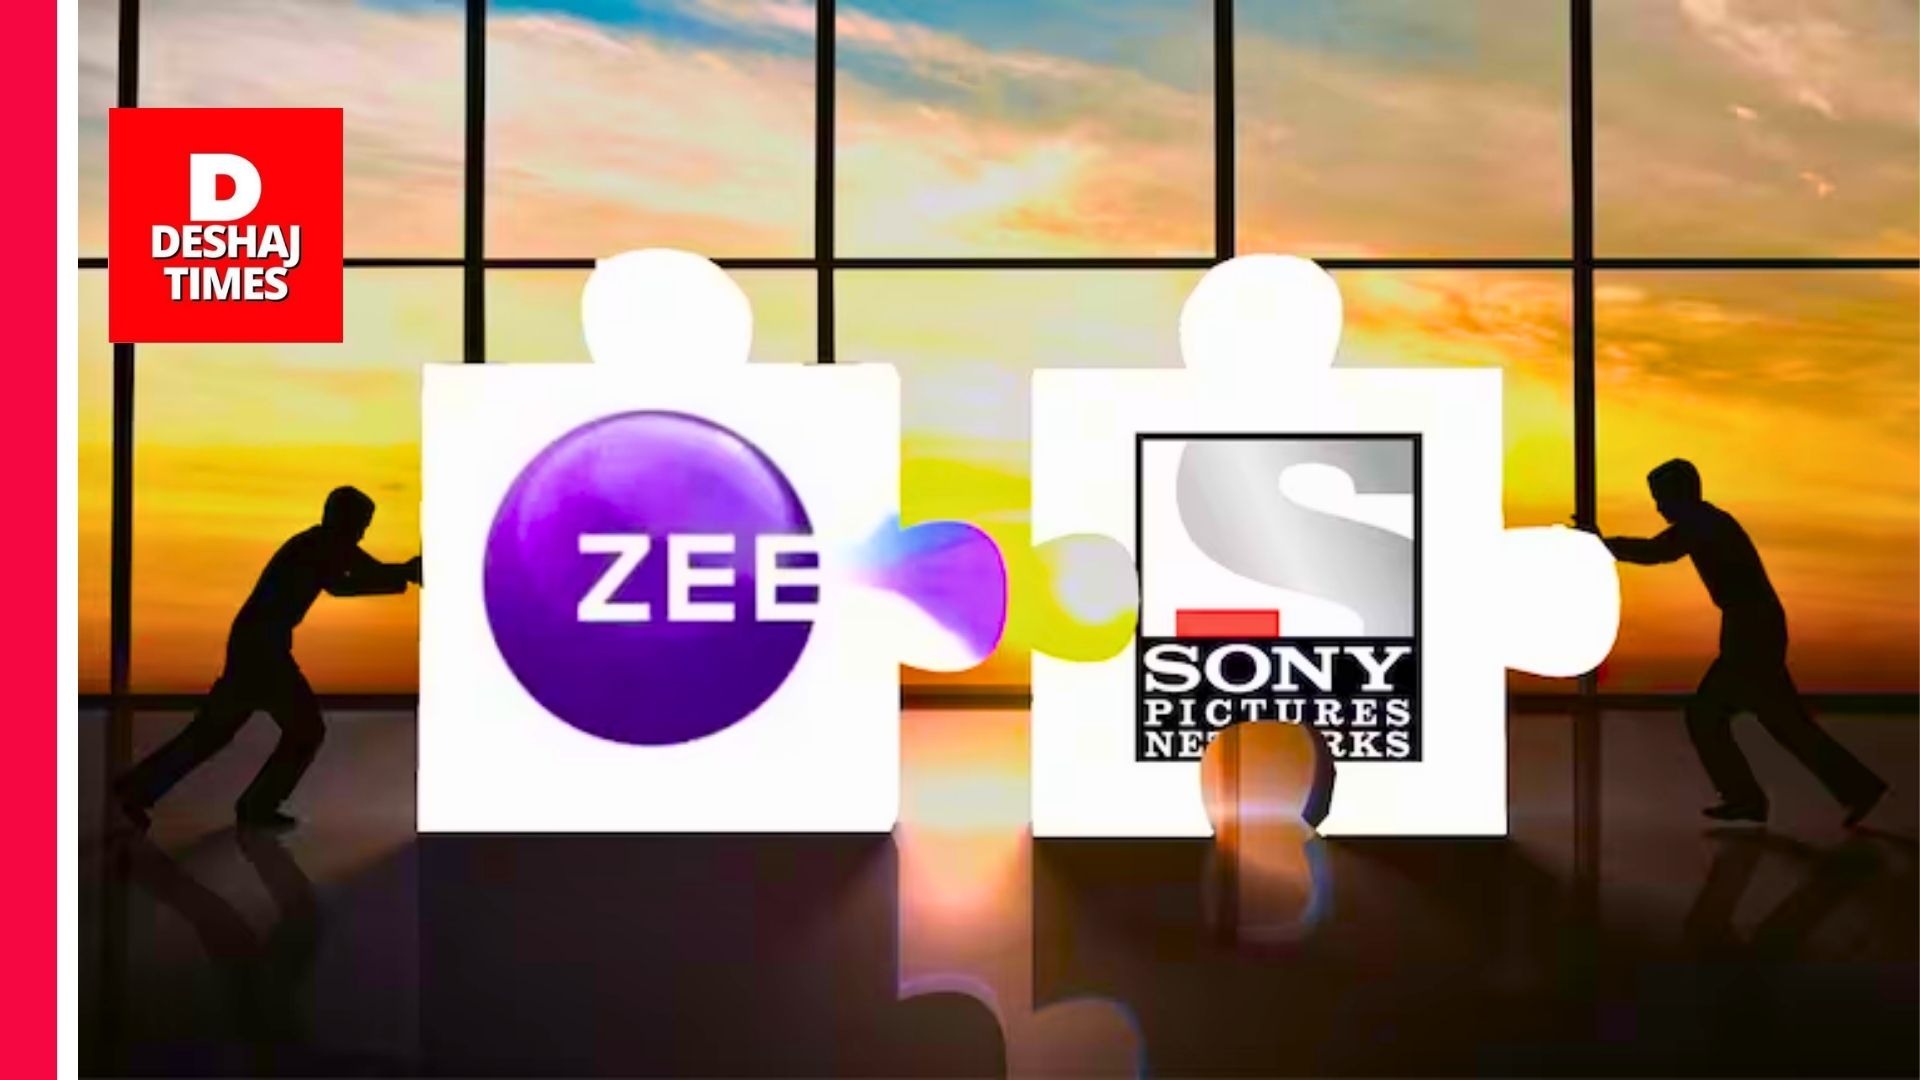 SONY cancels merger agreement with Zee Entertainment 